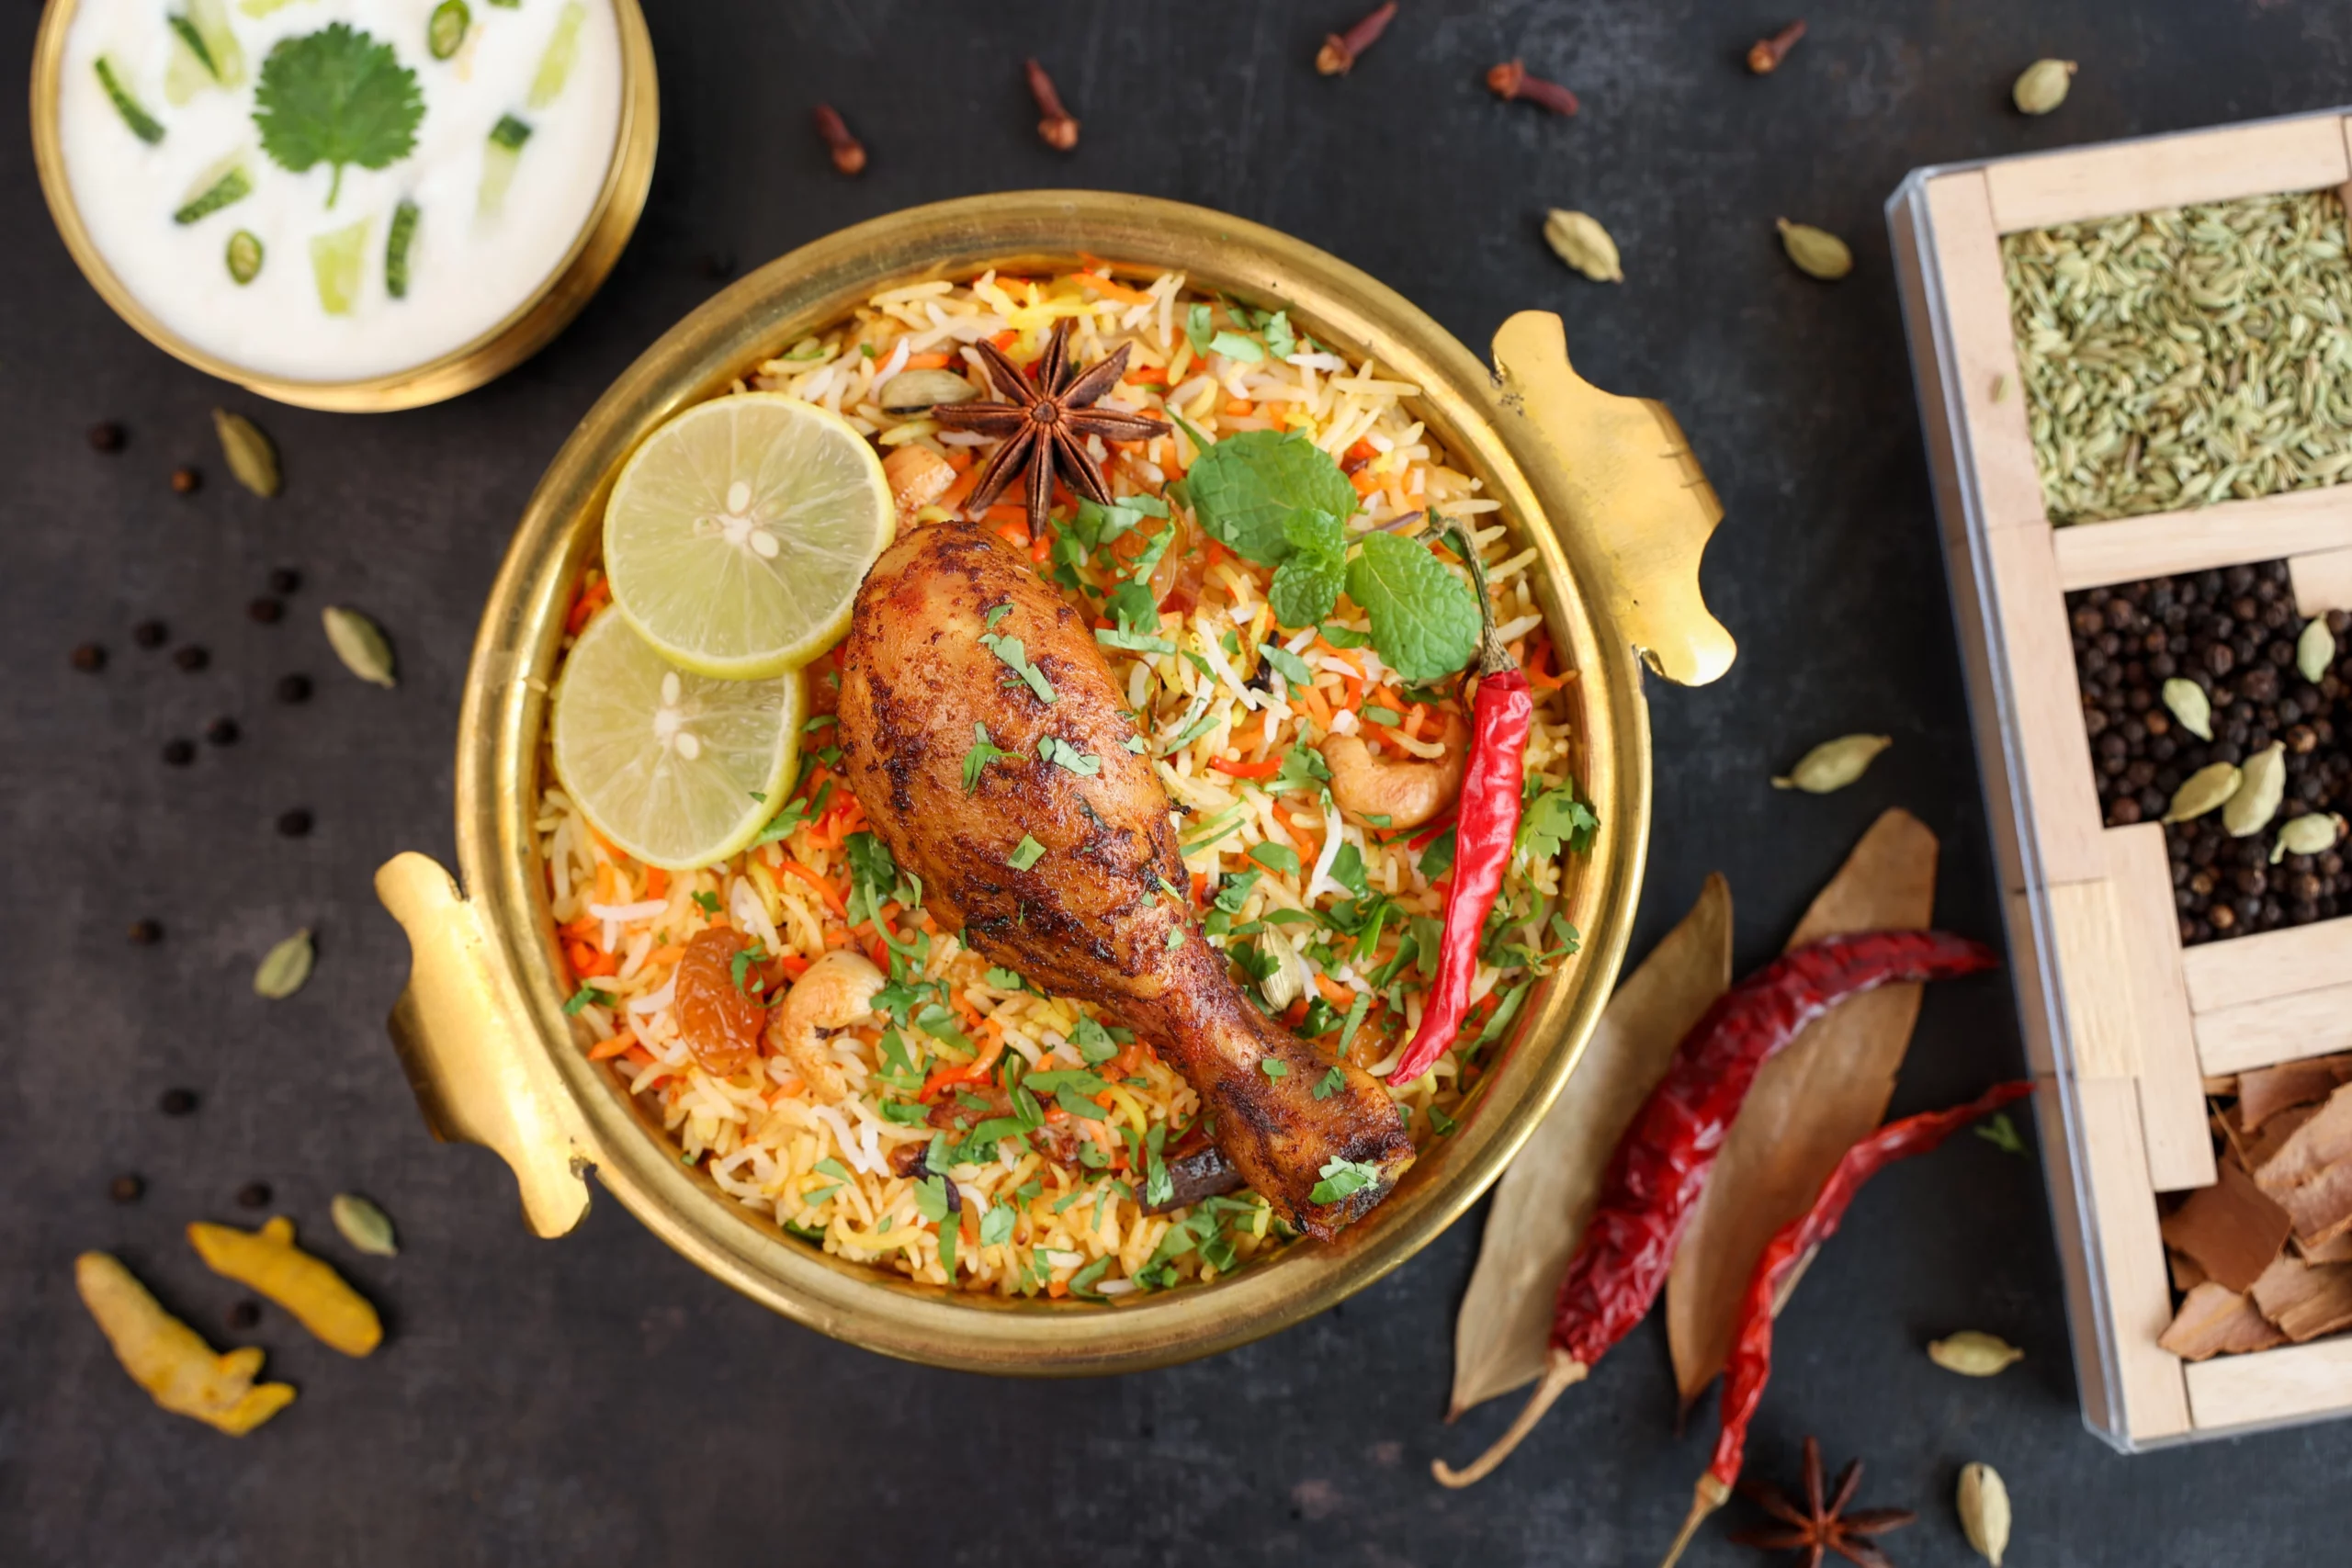 Top 9 Biryani Restaurants in Amsterdam: A Guide for Indian Food Lovers